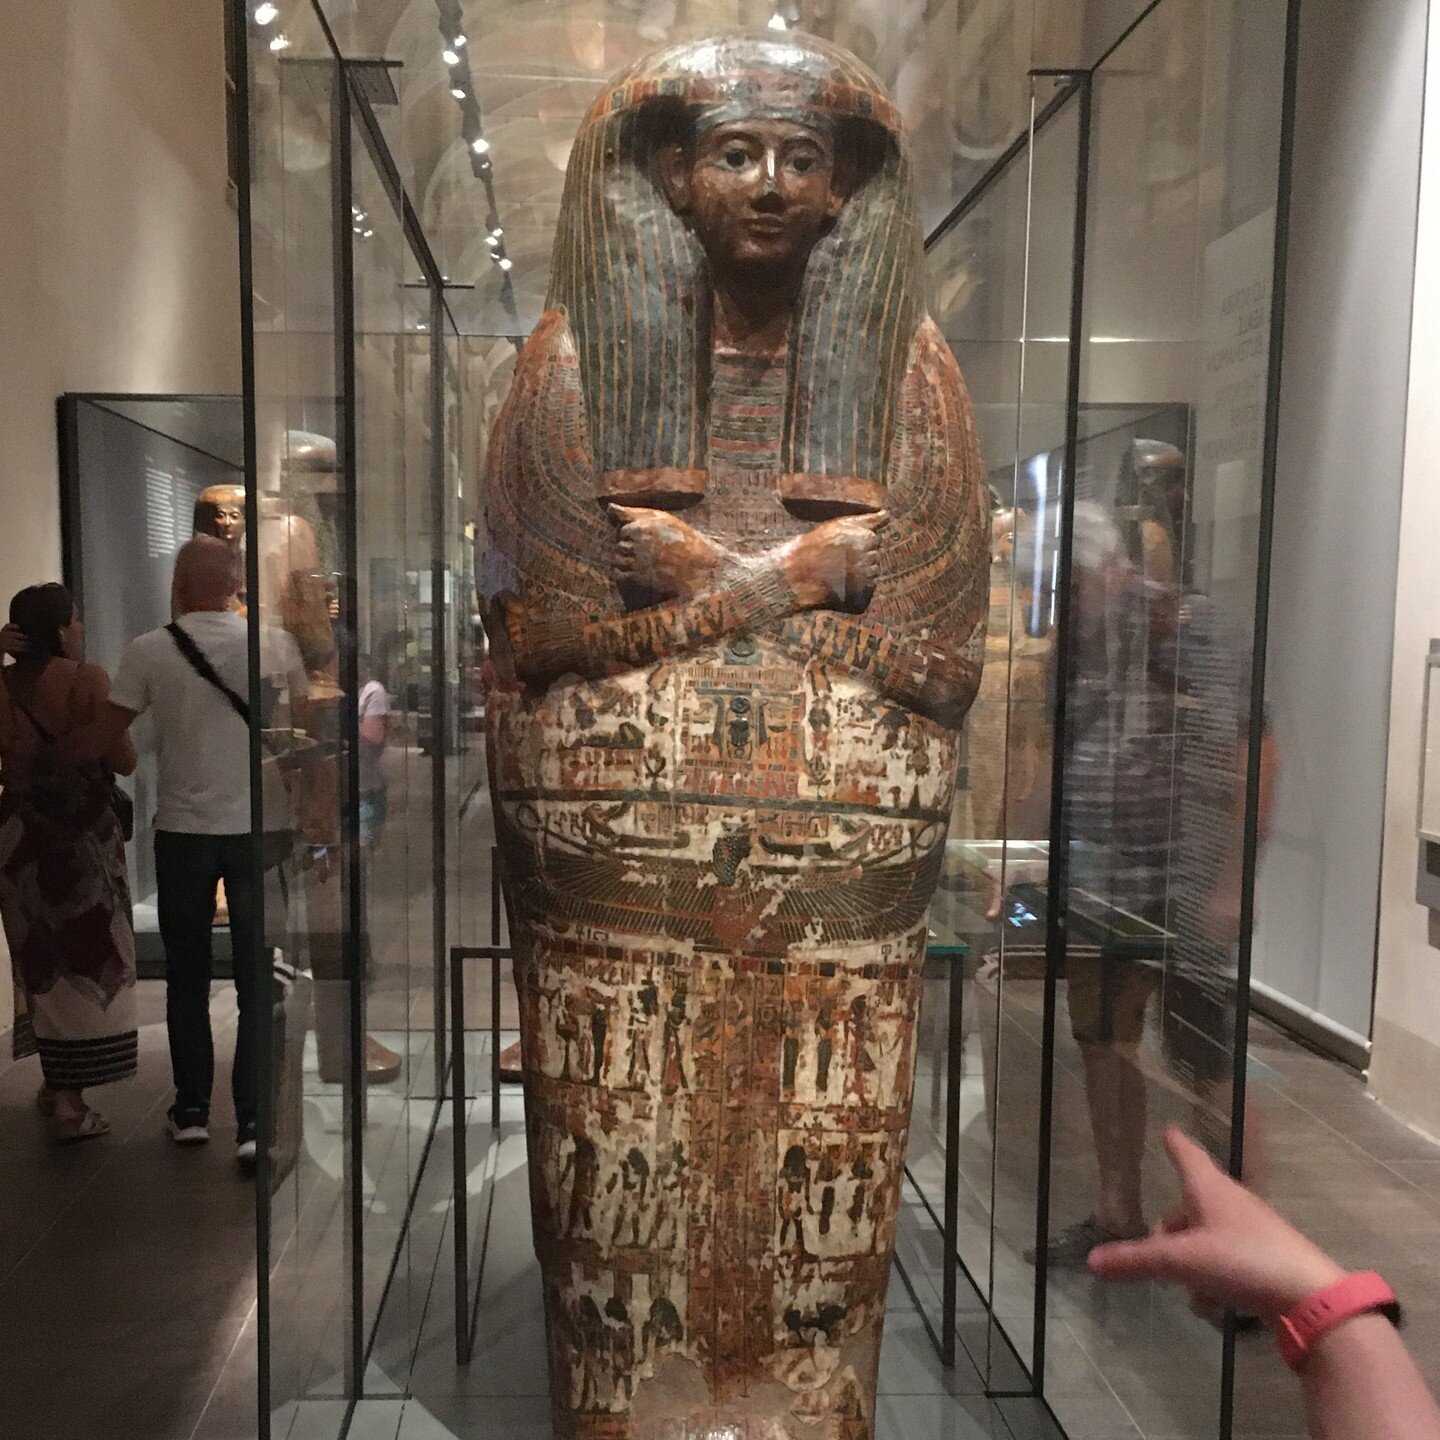 A Mummy visiting the other Mummies. 😂 A visit to Turin would not be complete without visiting the world-renowned Egyptian museum with over 6,500 exhibits on display (and more in the collections). The volume of artefacts and the stories to go with th